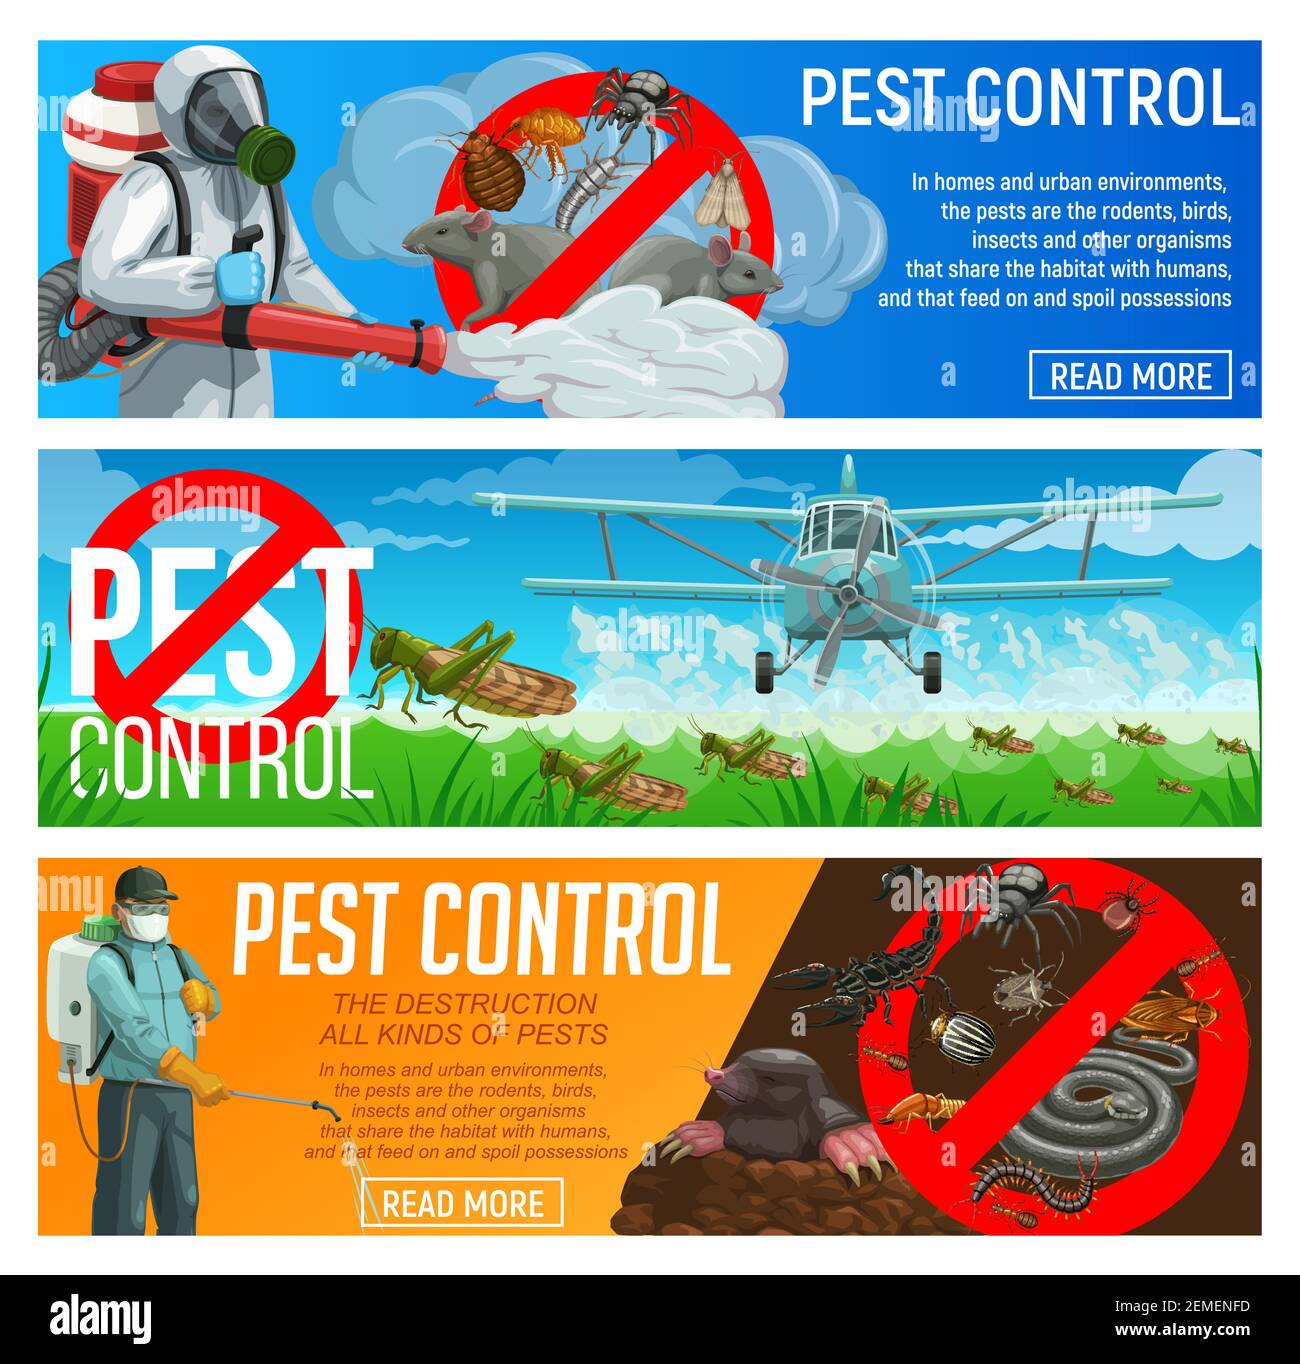 Pest control service vector banners, exterminators and agriculture airplane spraying insecticide against insects and rodents. Pests and field or garde Stock Vector